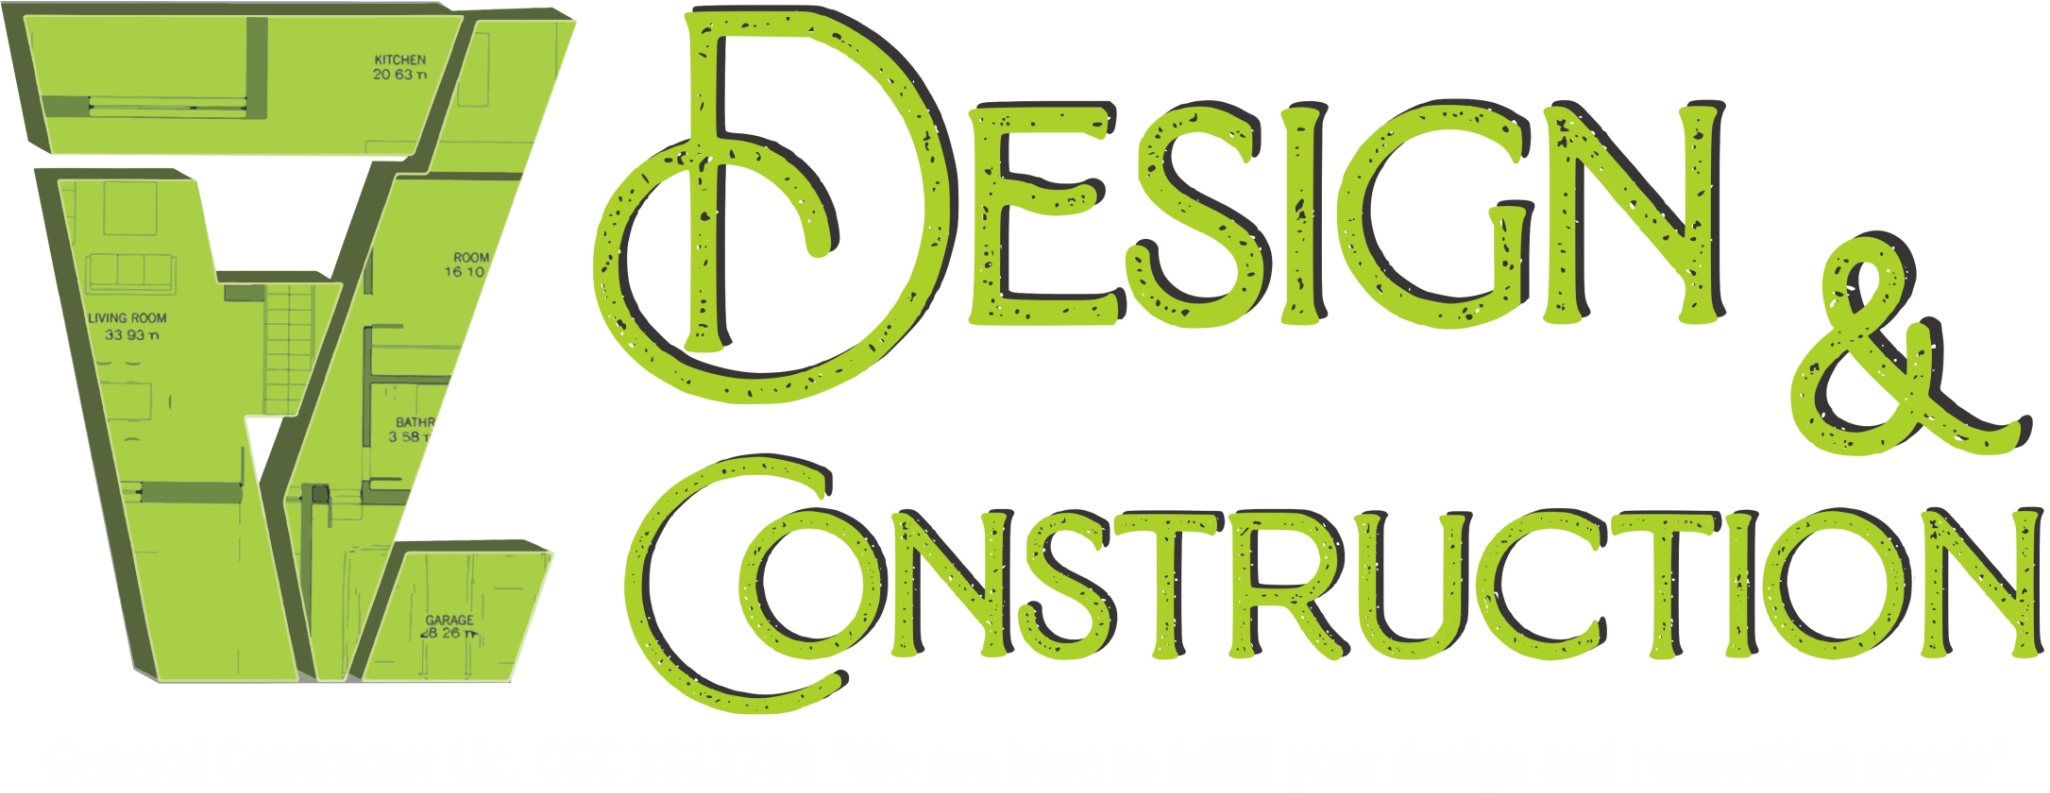 FVZ Design and Construction